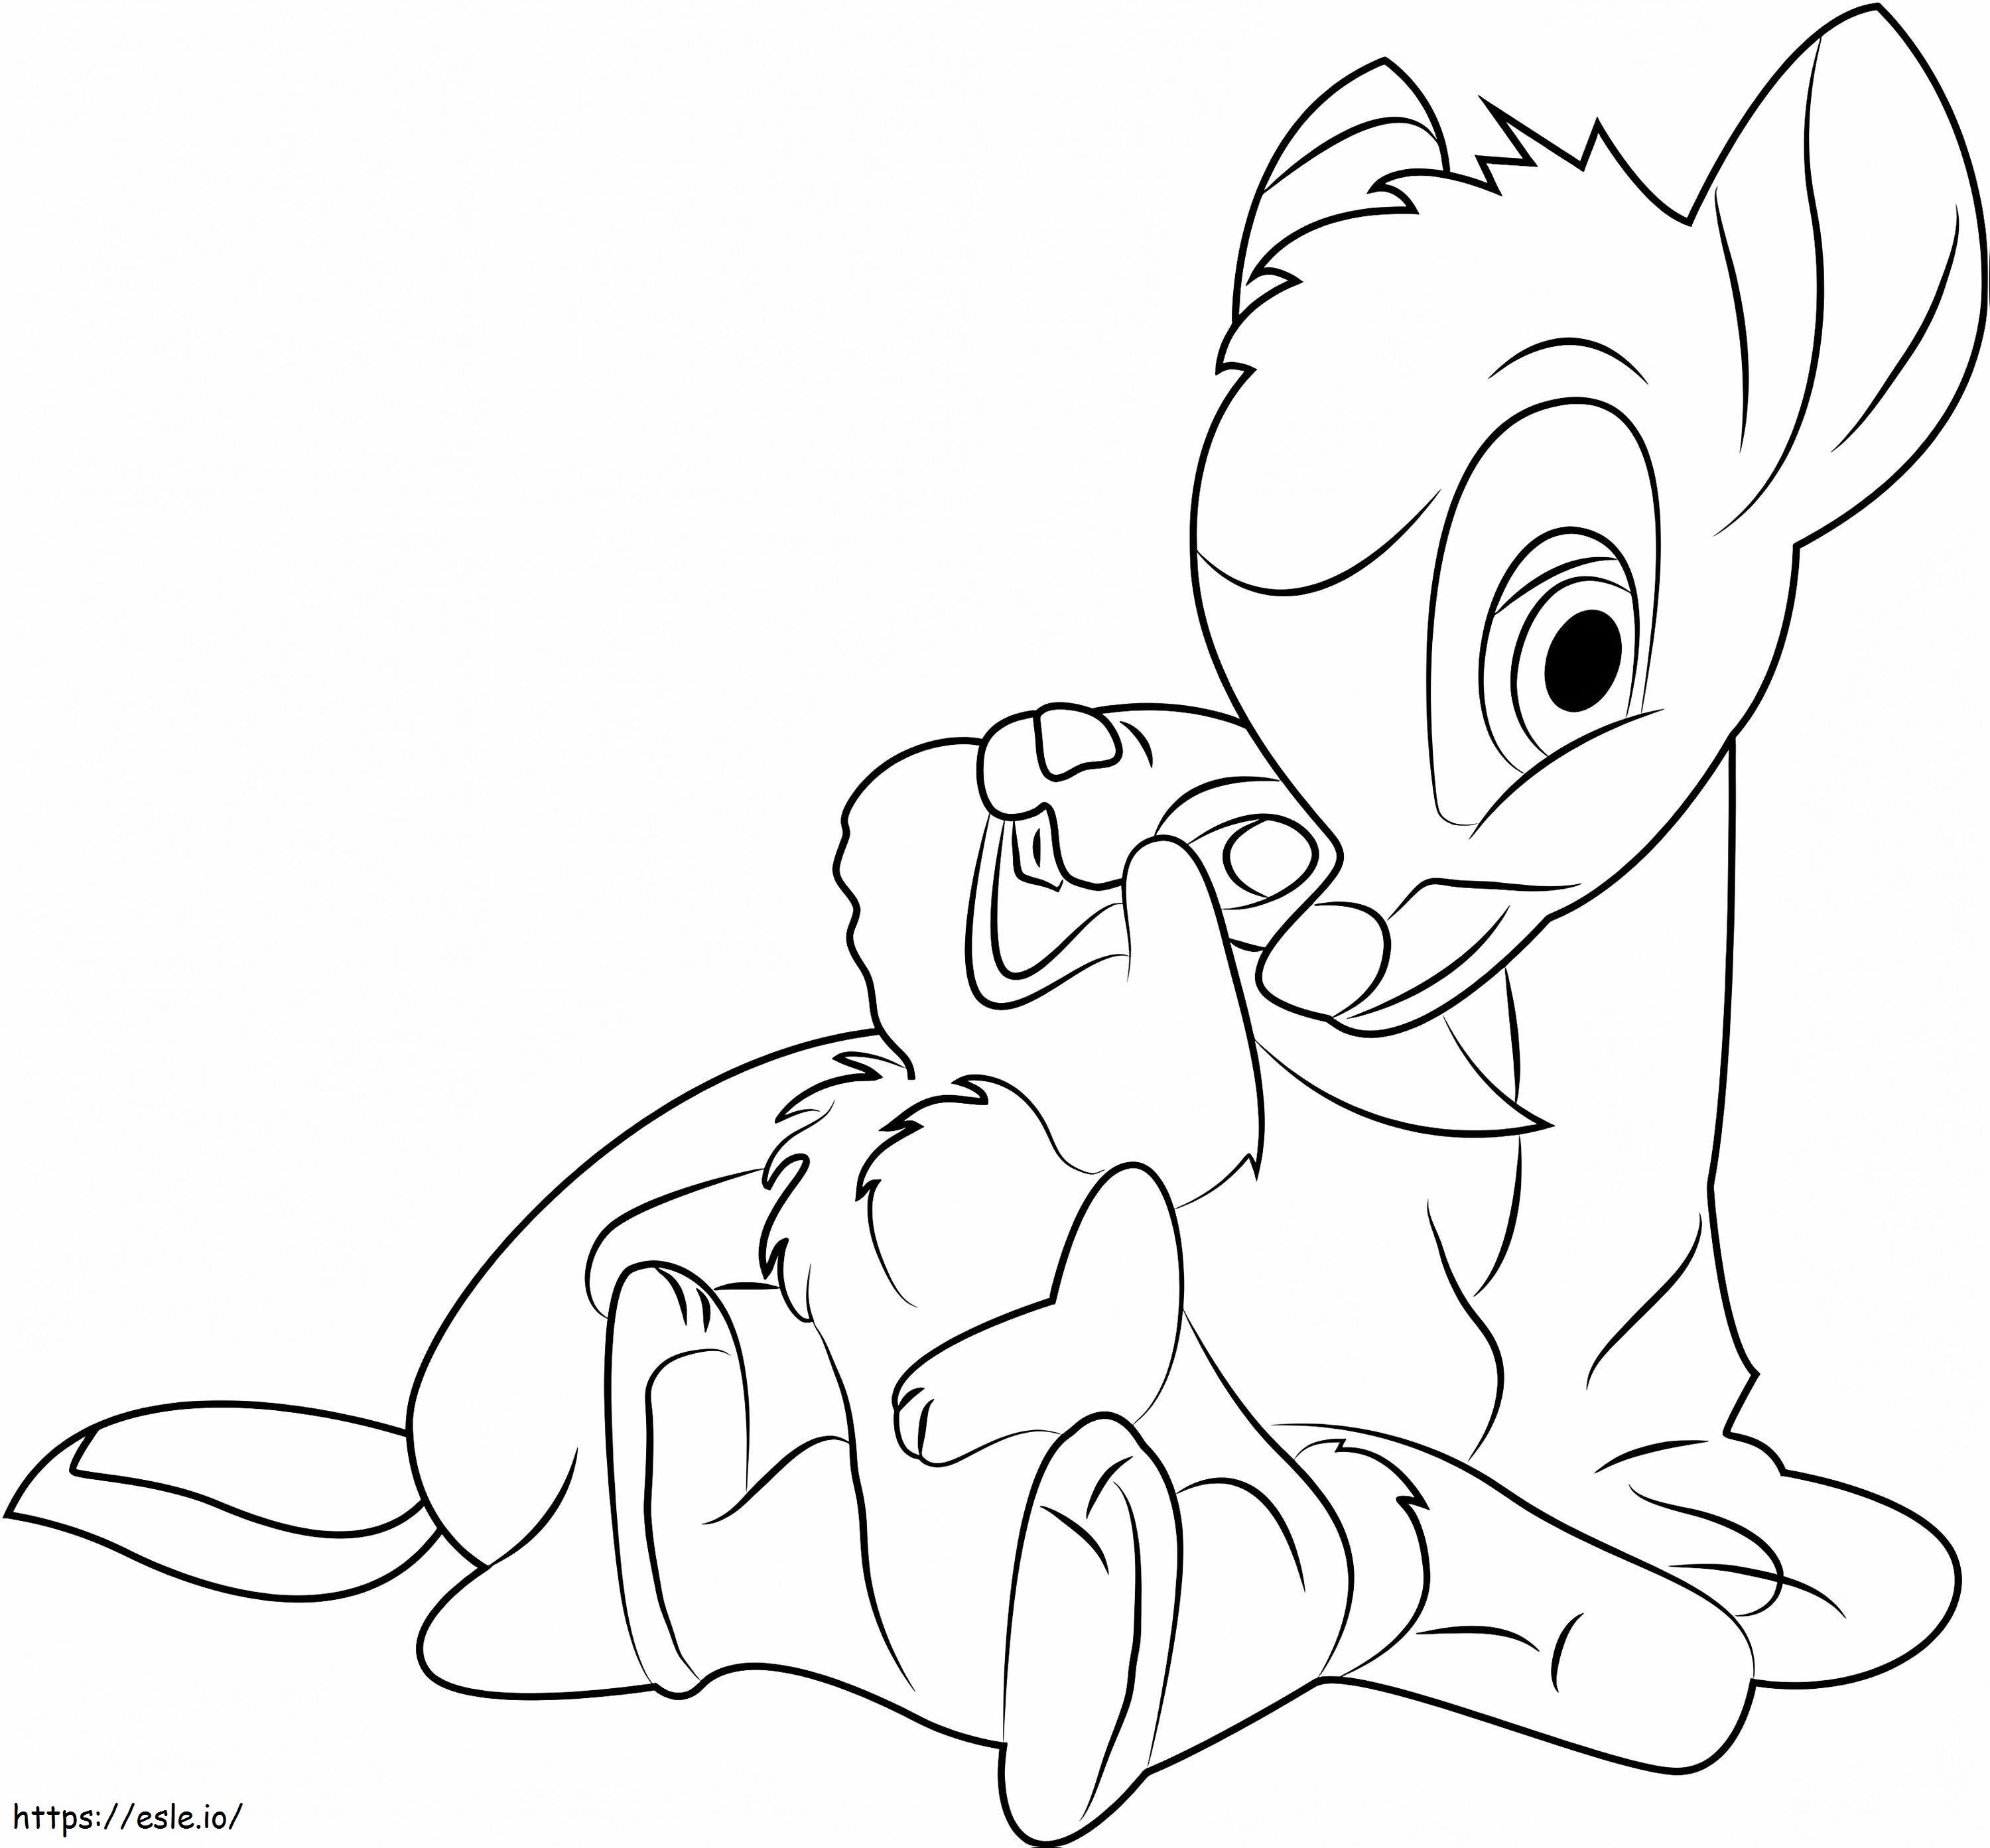 thumper from bambi coloring pages